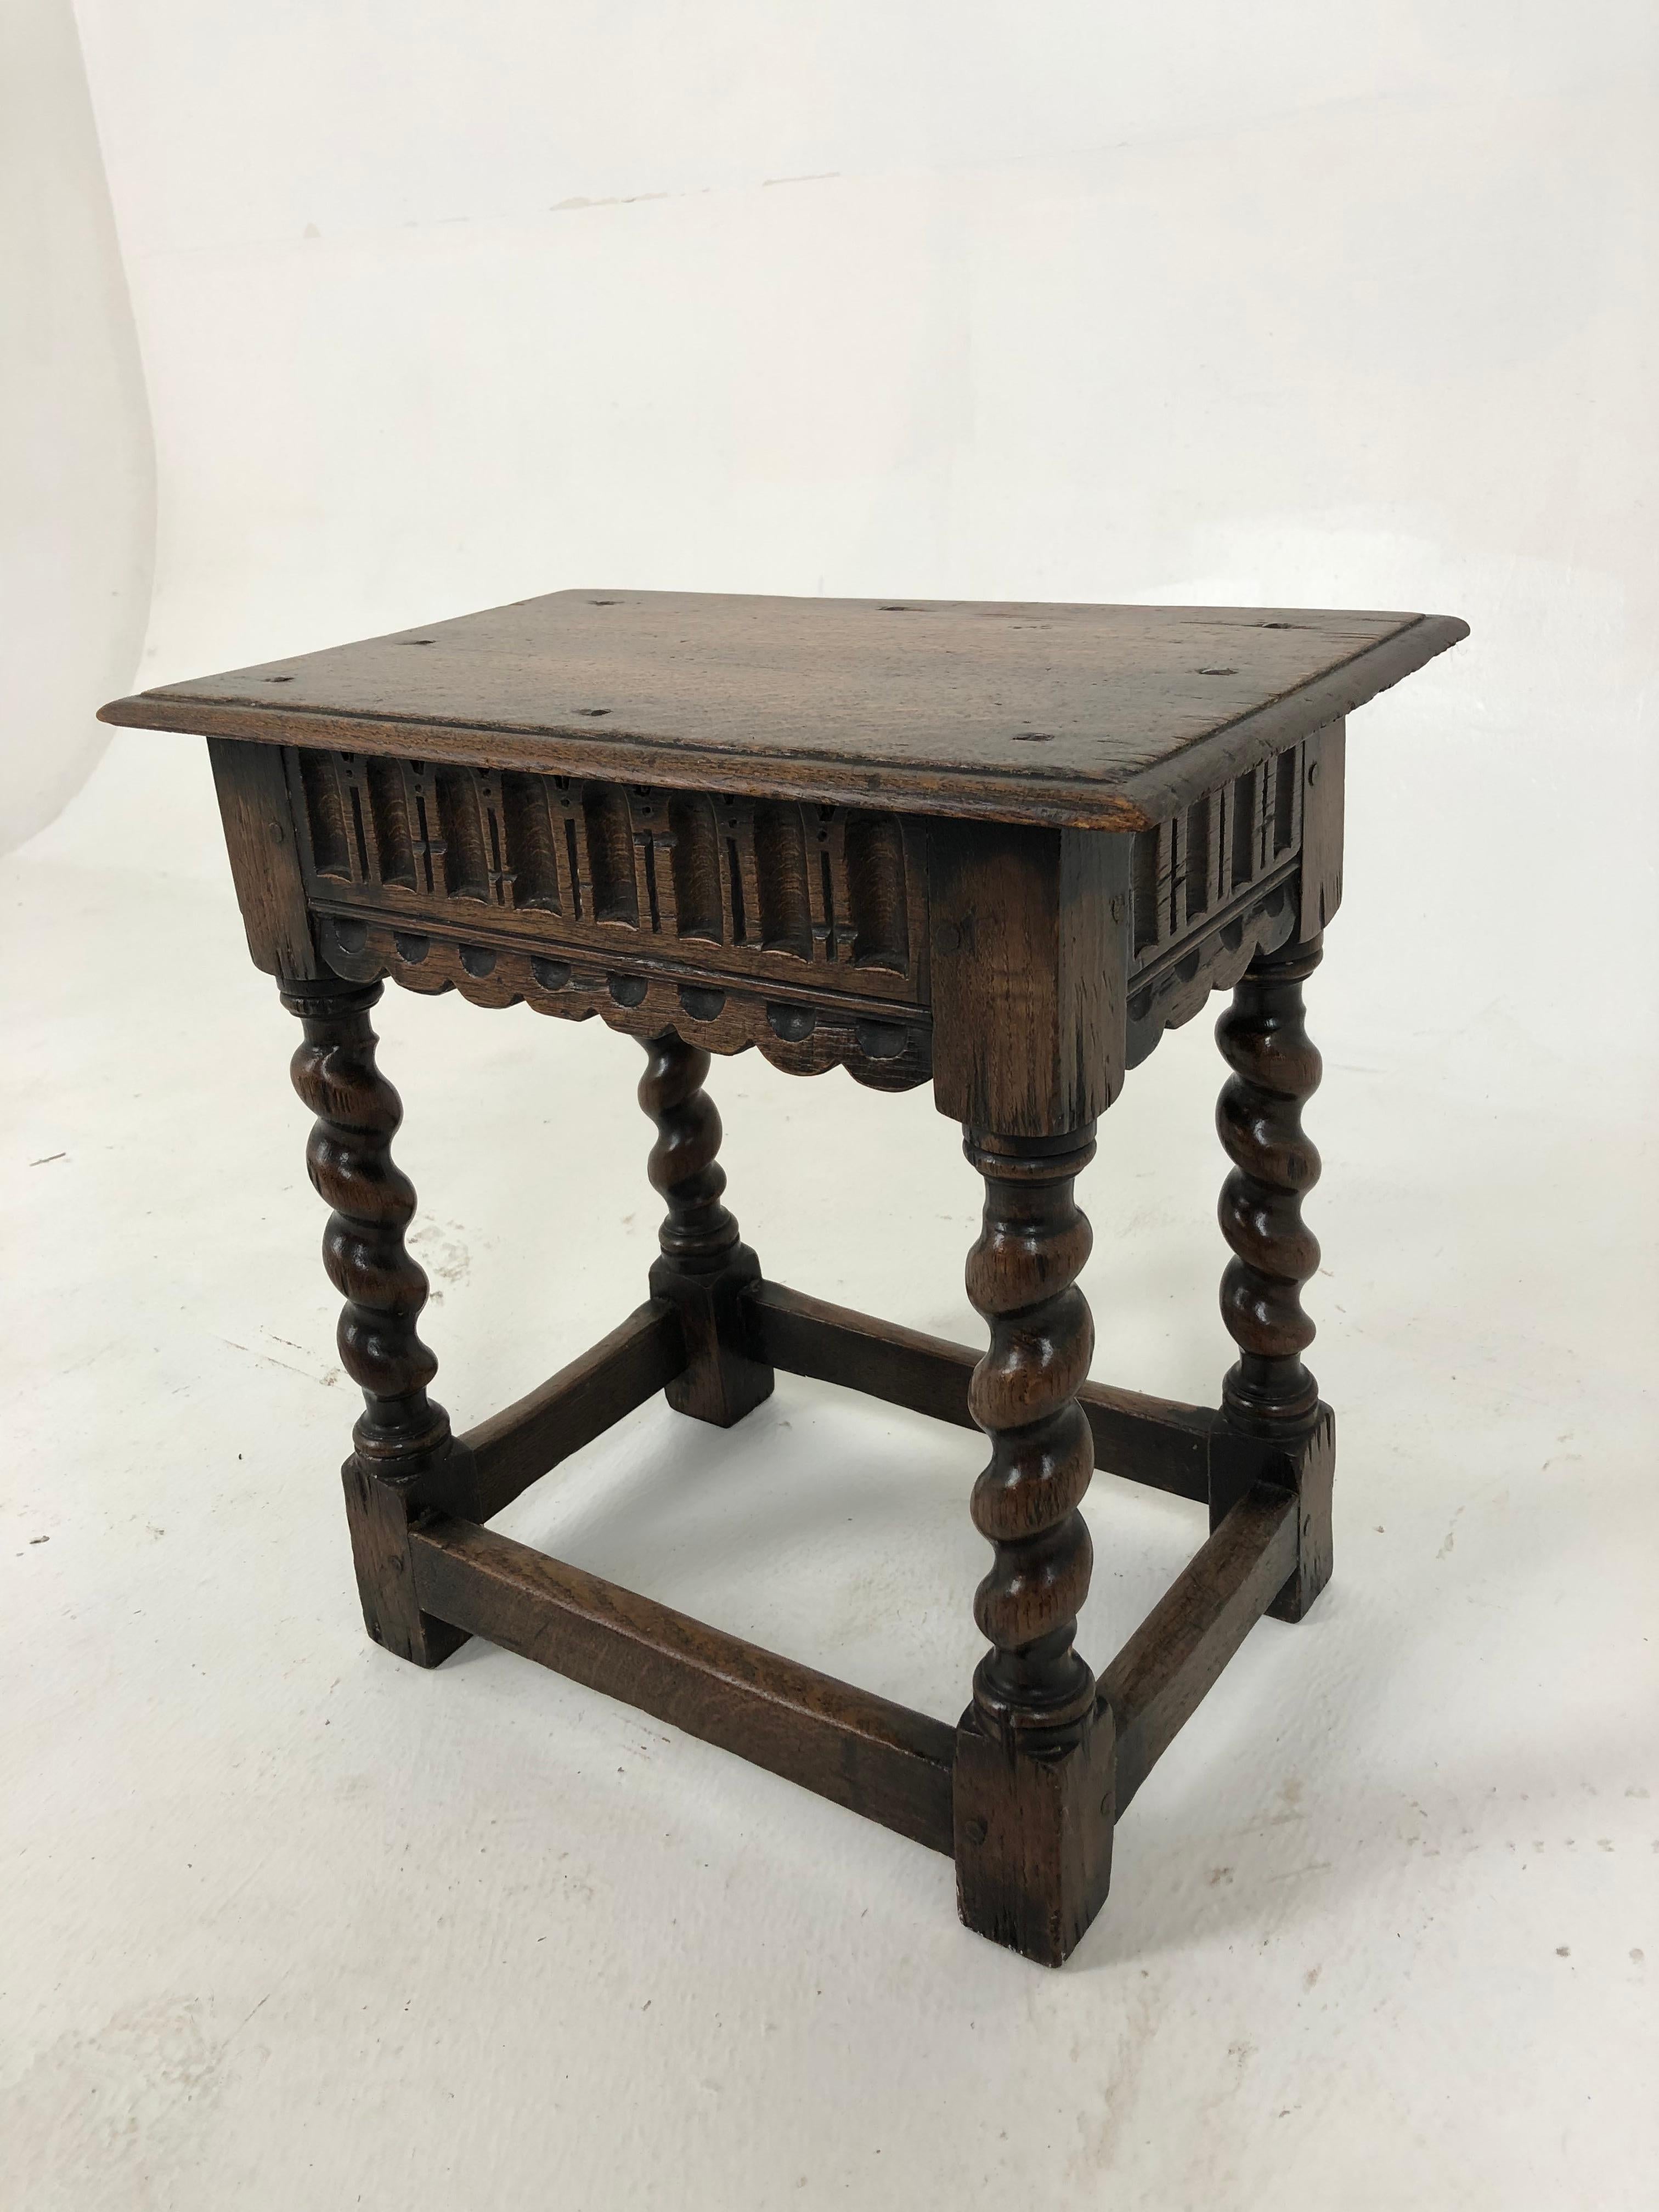 Antique Victorian Carved Barley Twist Oak Joint Stool, Bench, Table, Scotland 1890, H836

Scotland 1890
Solid Oak
Original Finish 
Rectangular moulded top 
Carved frieze underneath
All standing on thick barley twist legs
Connected with worn oak